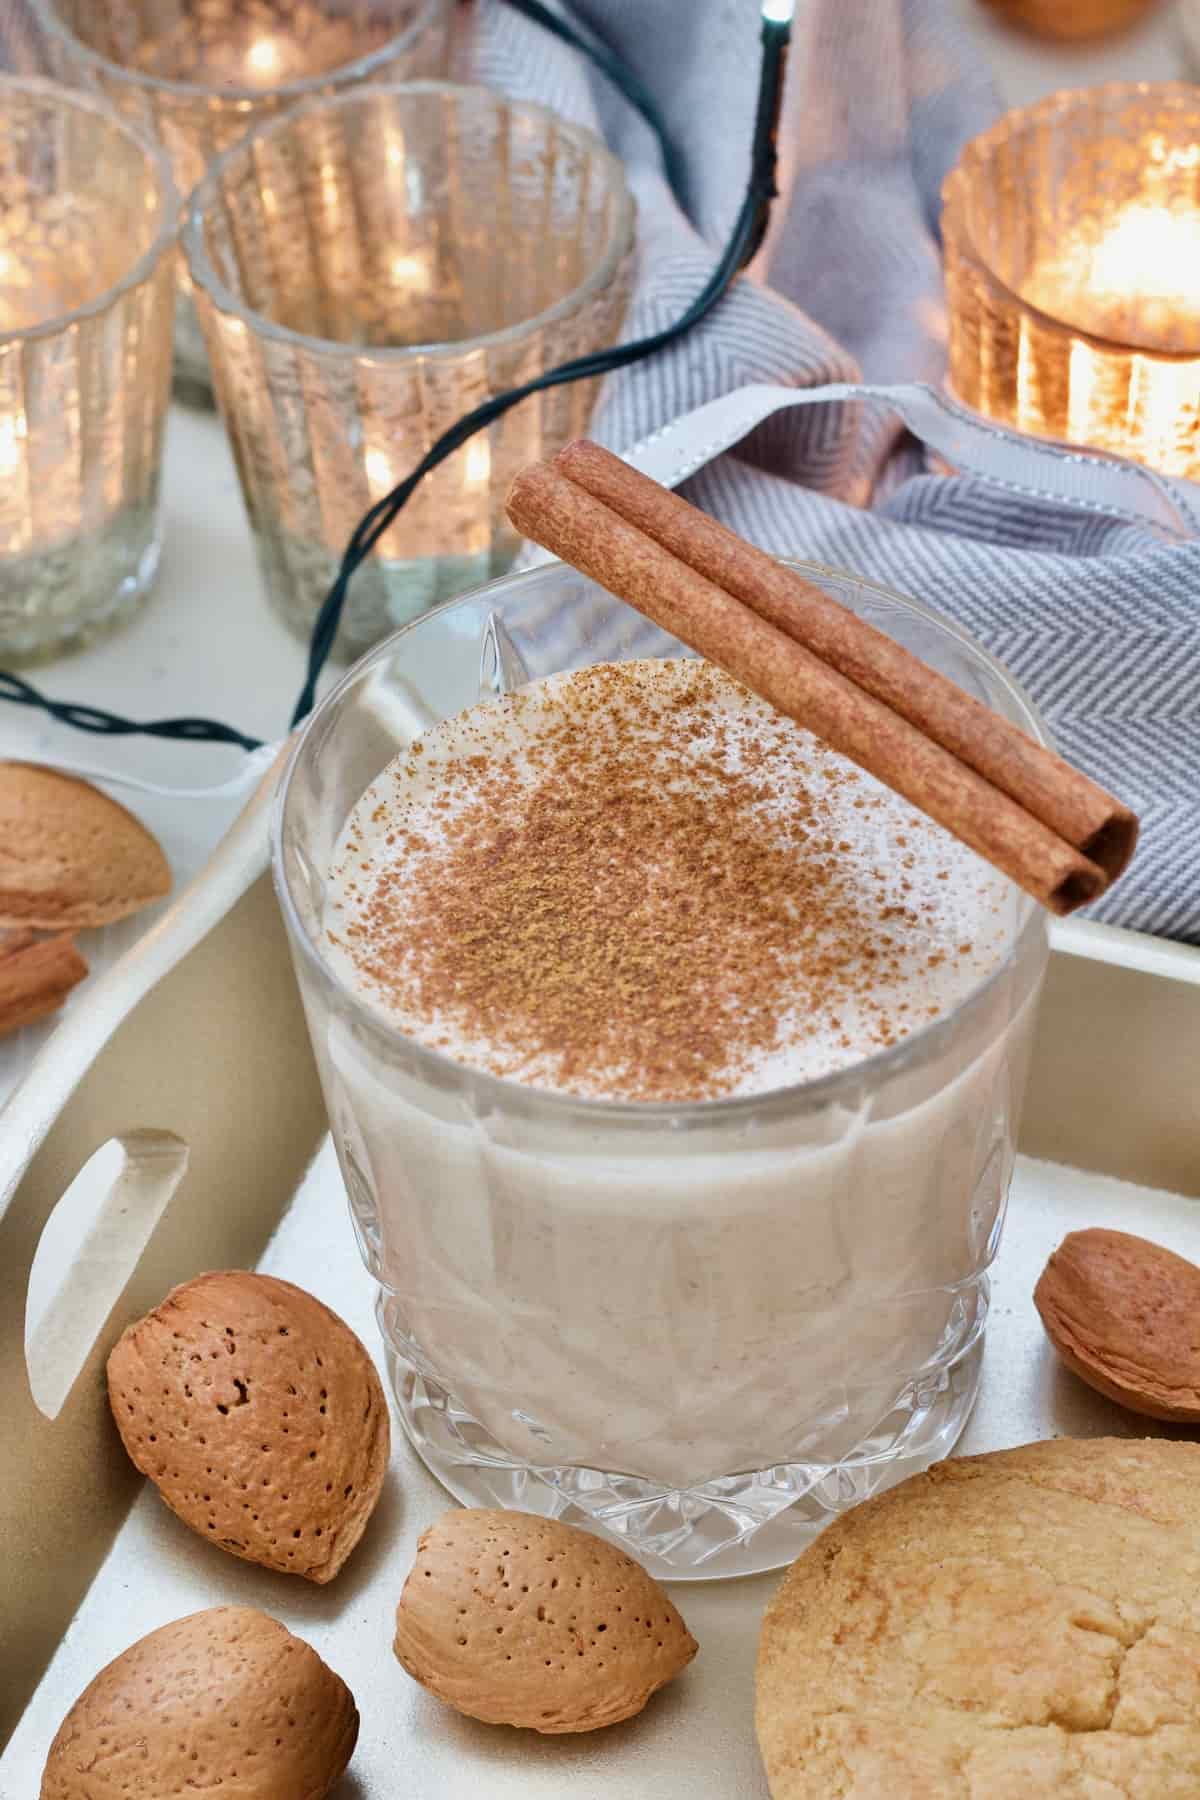 Small glass with eggnog, cinnamon stick, almonds in shells and mince pie.